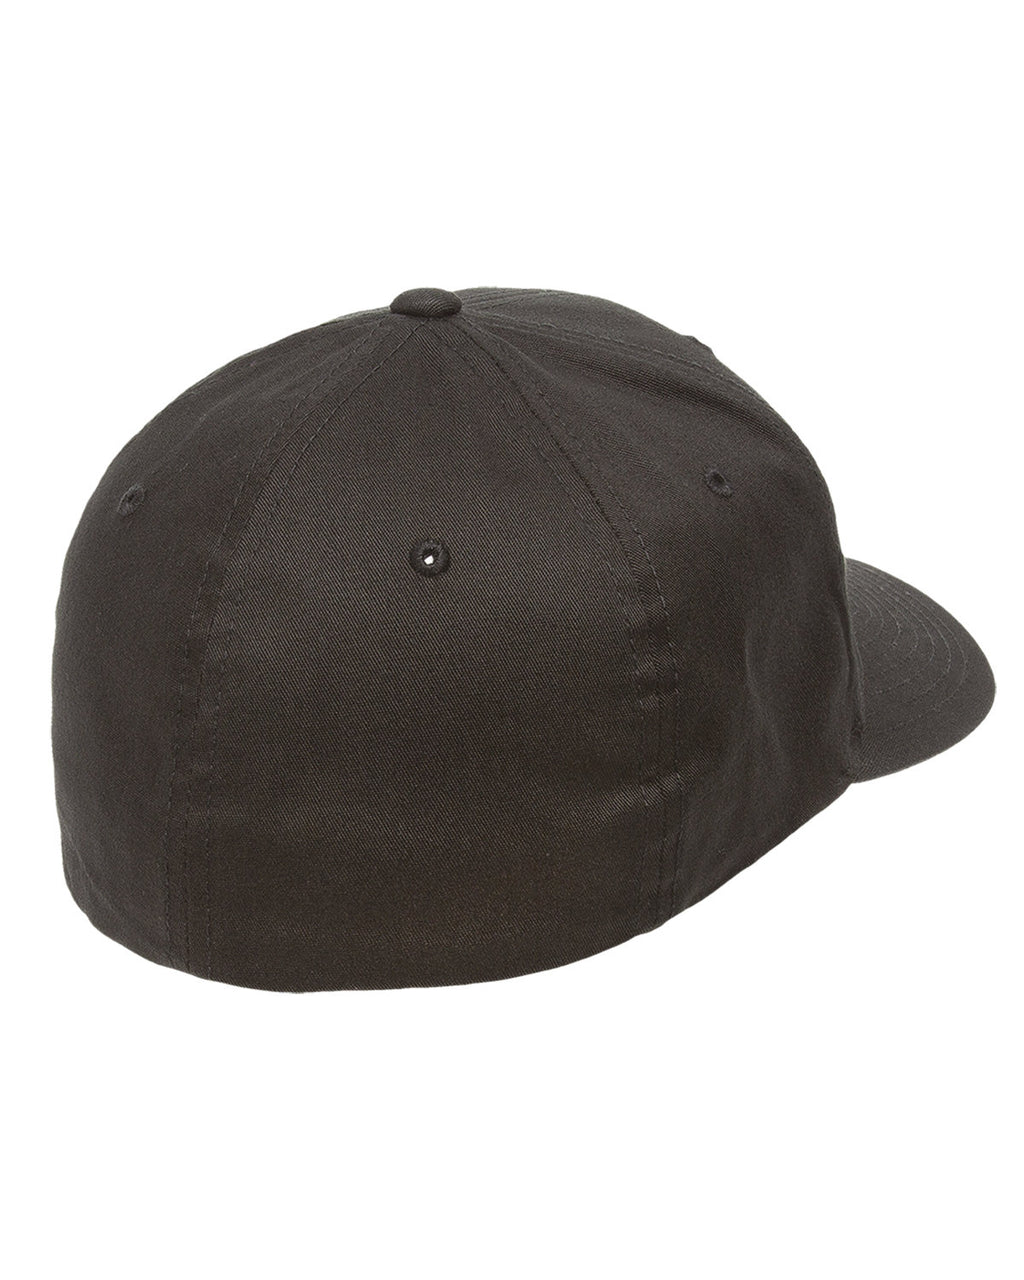 Yupoong Cap Cotton and Corporate Accessories Twill V-Flexfit Hats